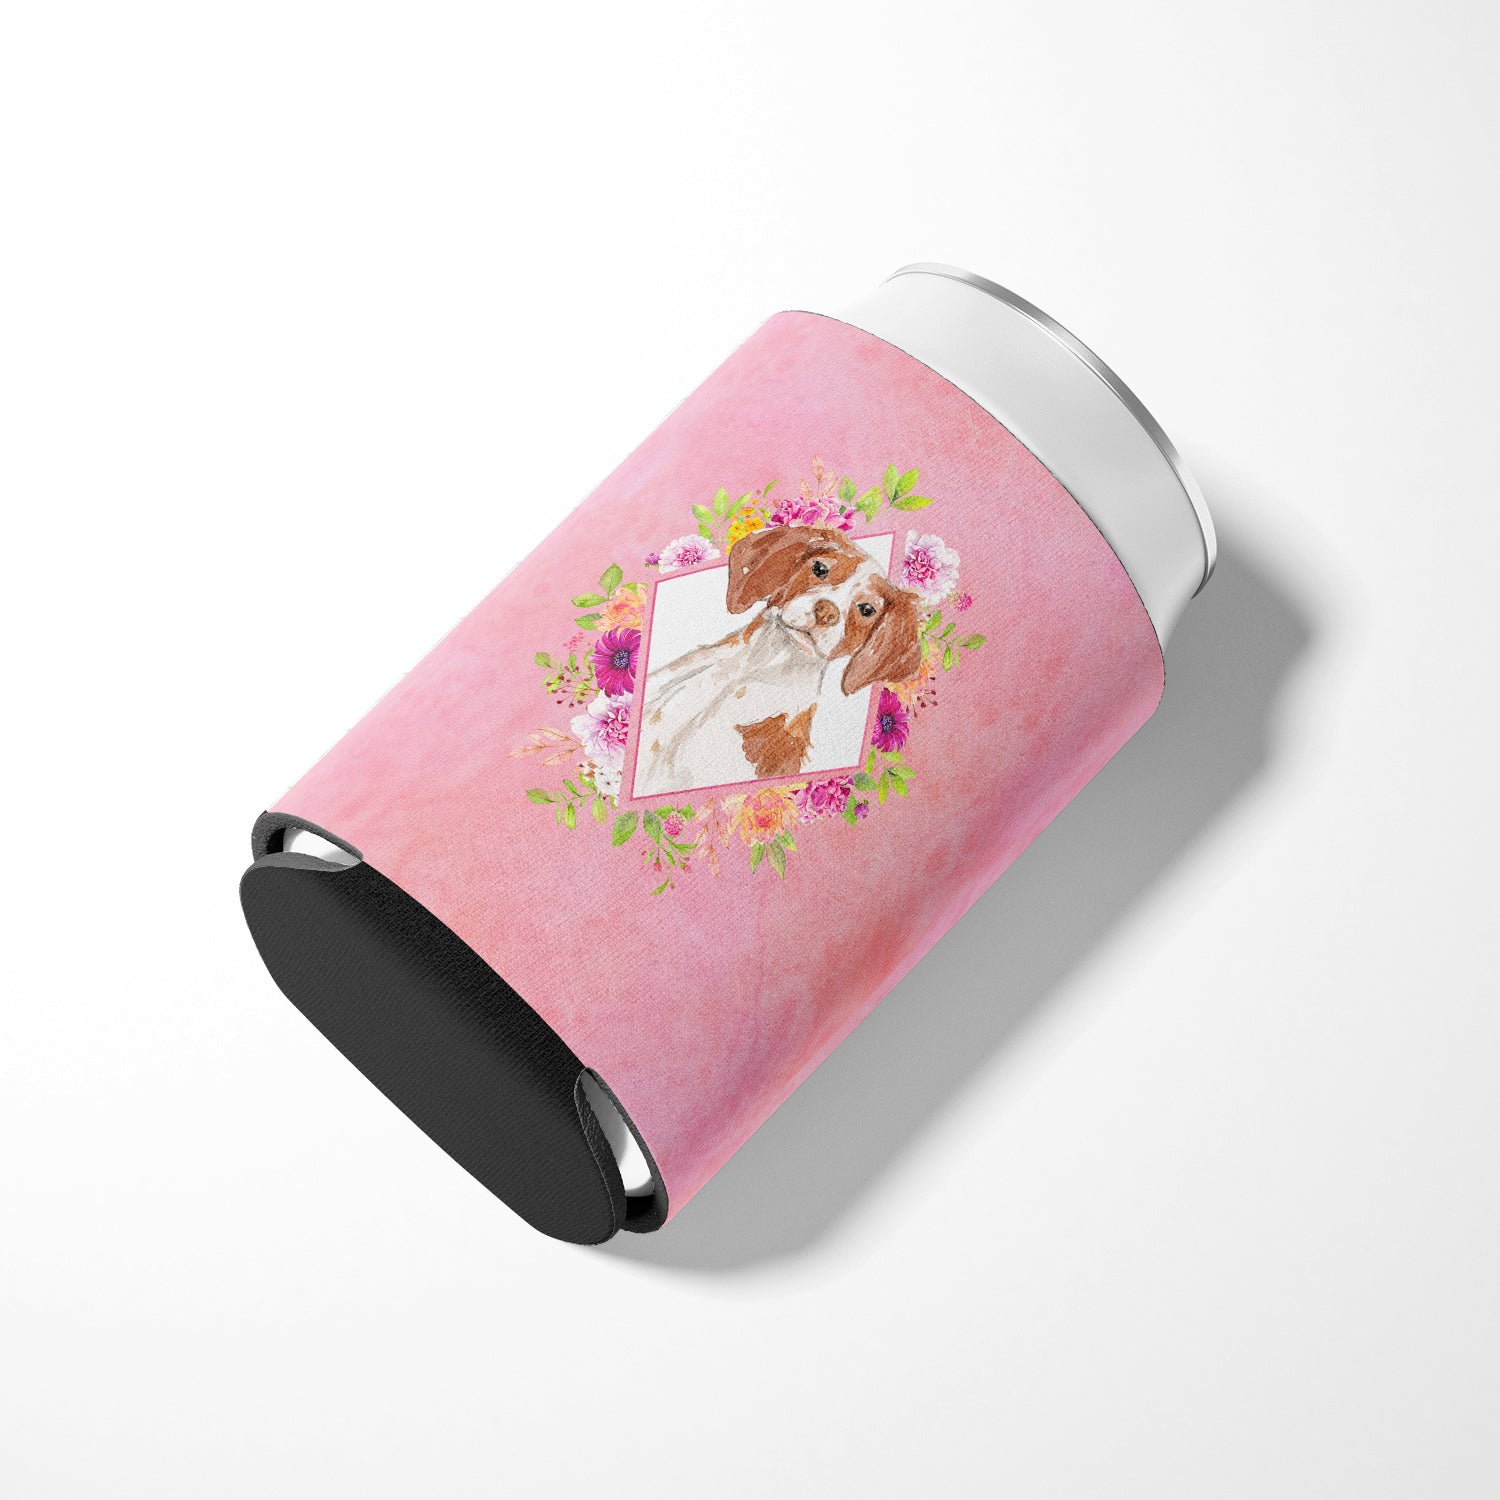 Brittany Spaniel Pink Flowers Can or Bottle Hugger CK4254CC  the-store.com.